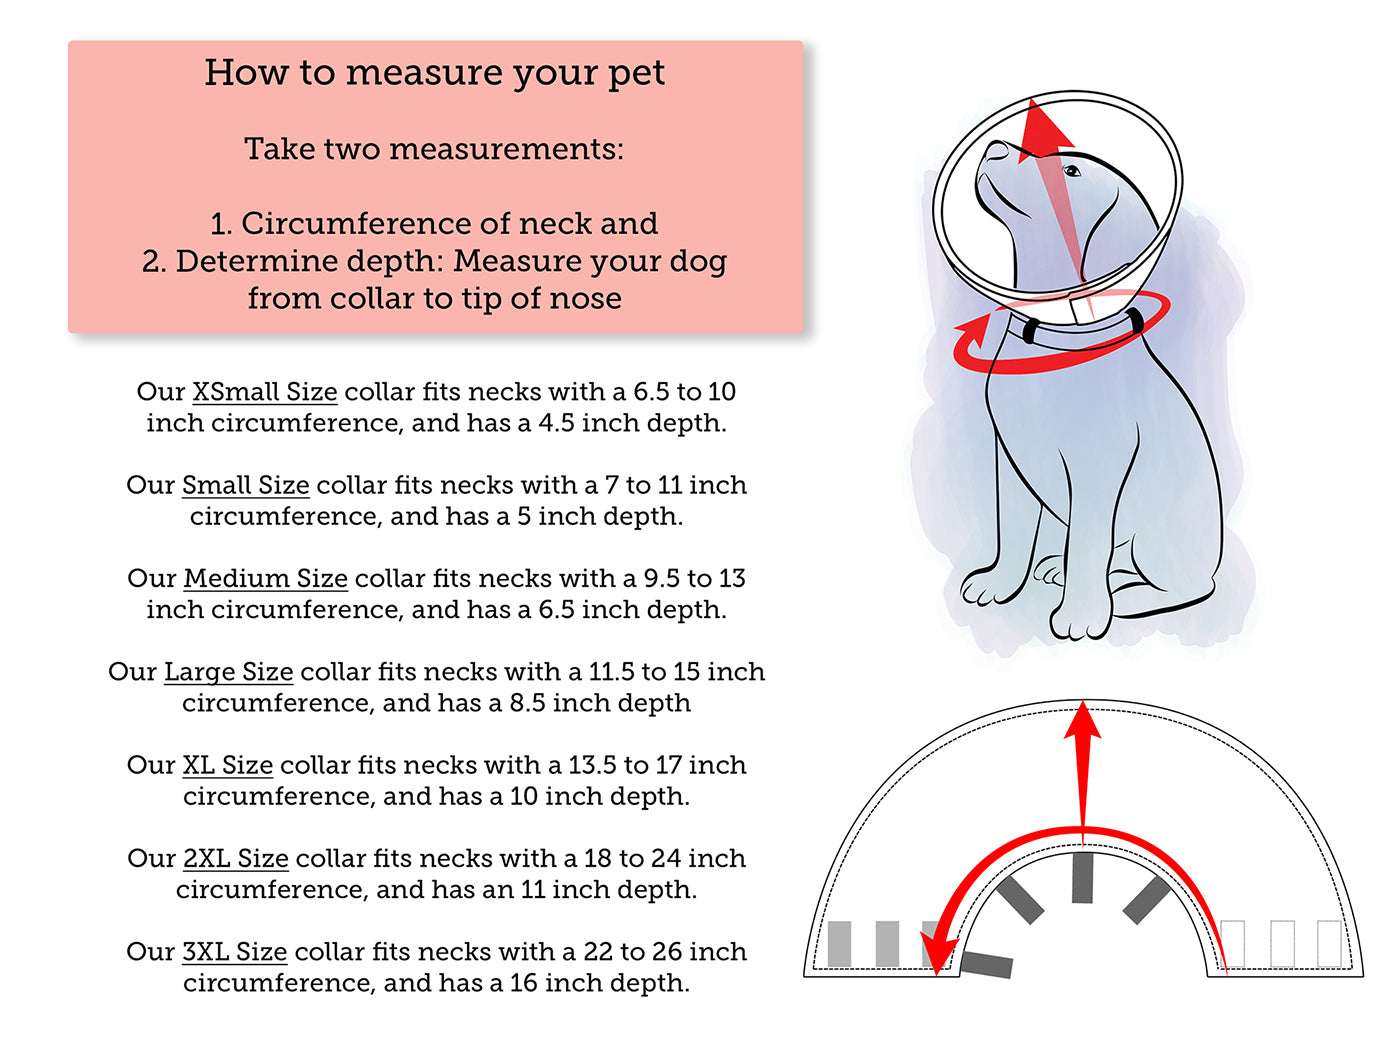 How to measure, includes a diagram of a dog and a collar as well as measurements of each size